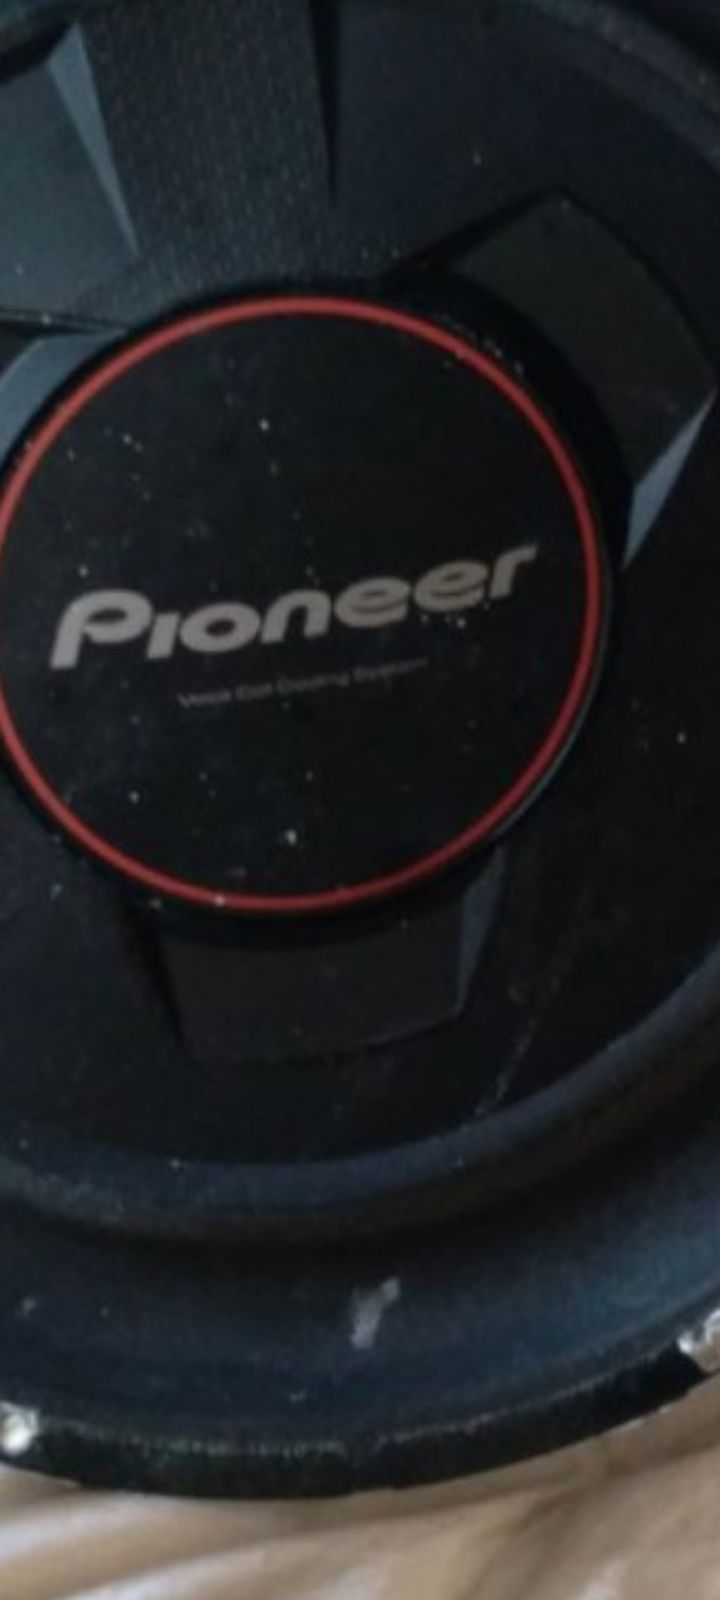 Pioneer 12 inch, 1300W max power subwoofer Voice Coil Cooling System